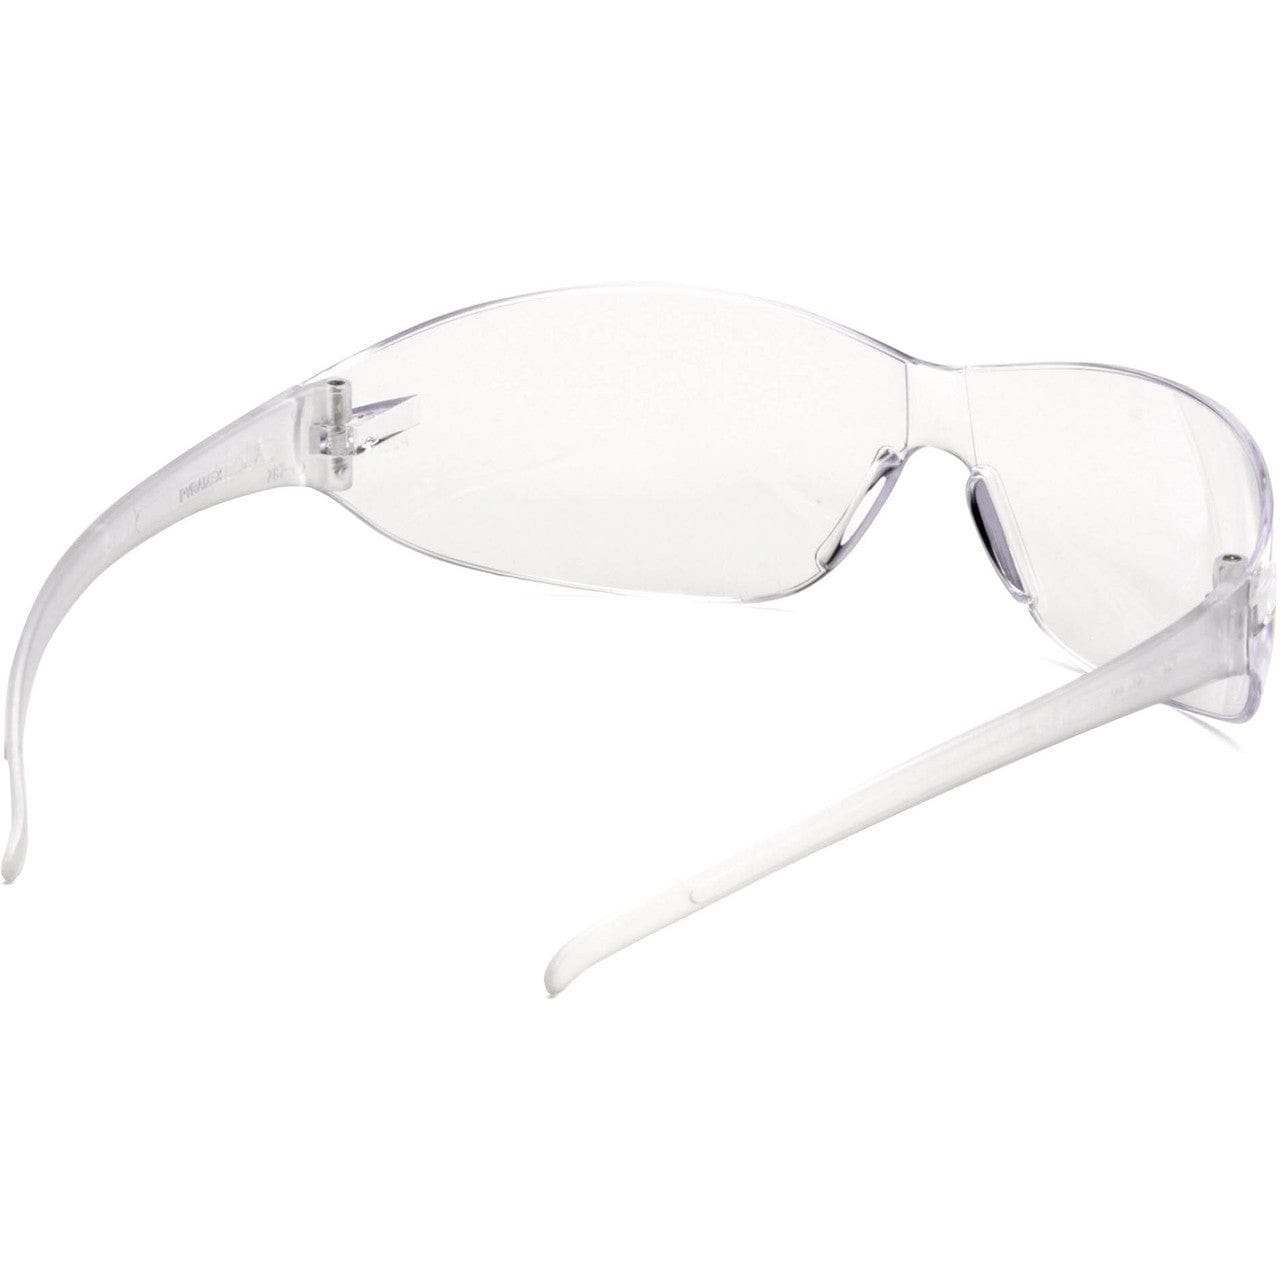 Pyramex Alair Safety Glasses with Clear Anti-Fog Lens S3210ST Inside View